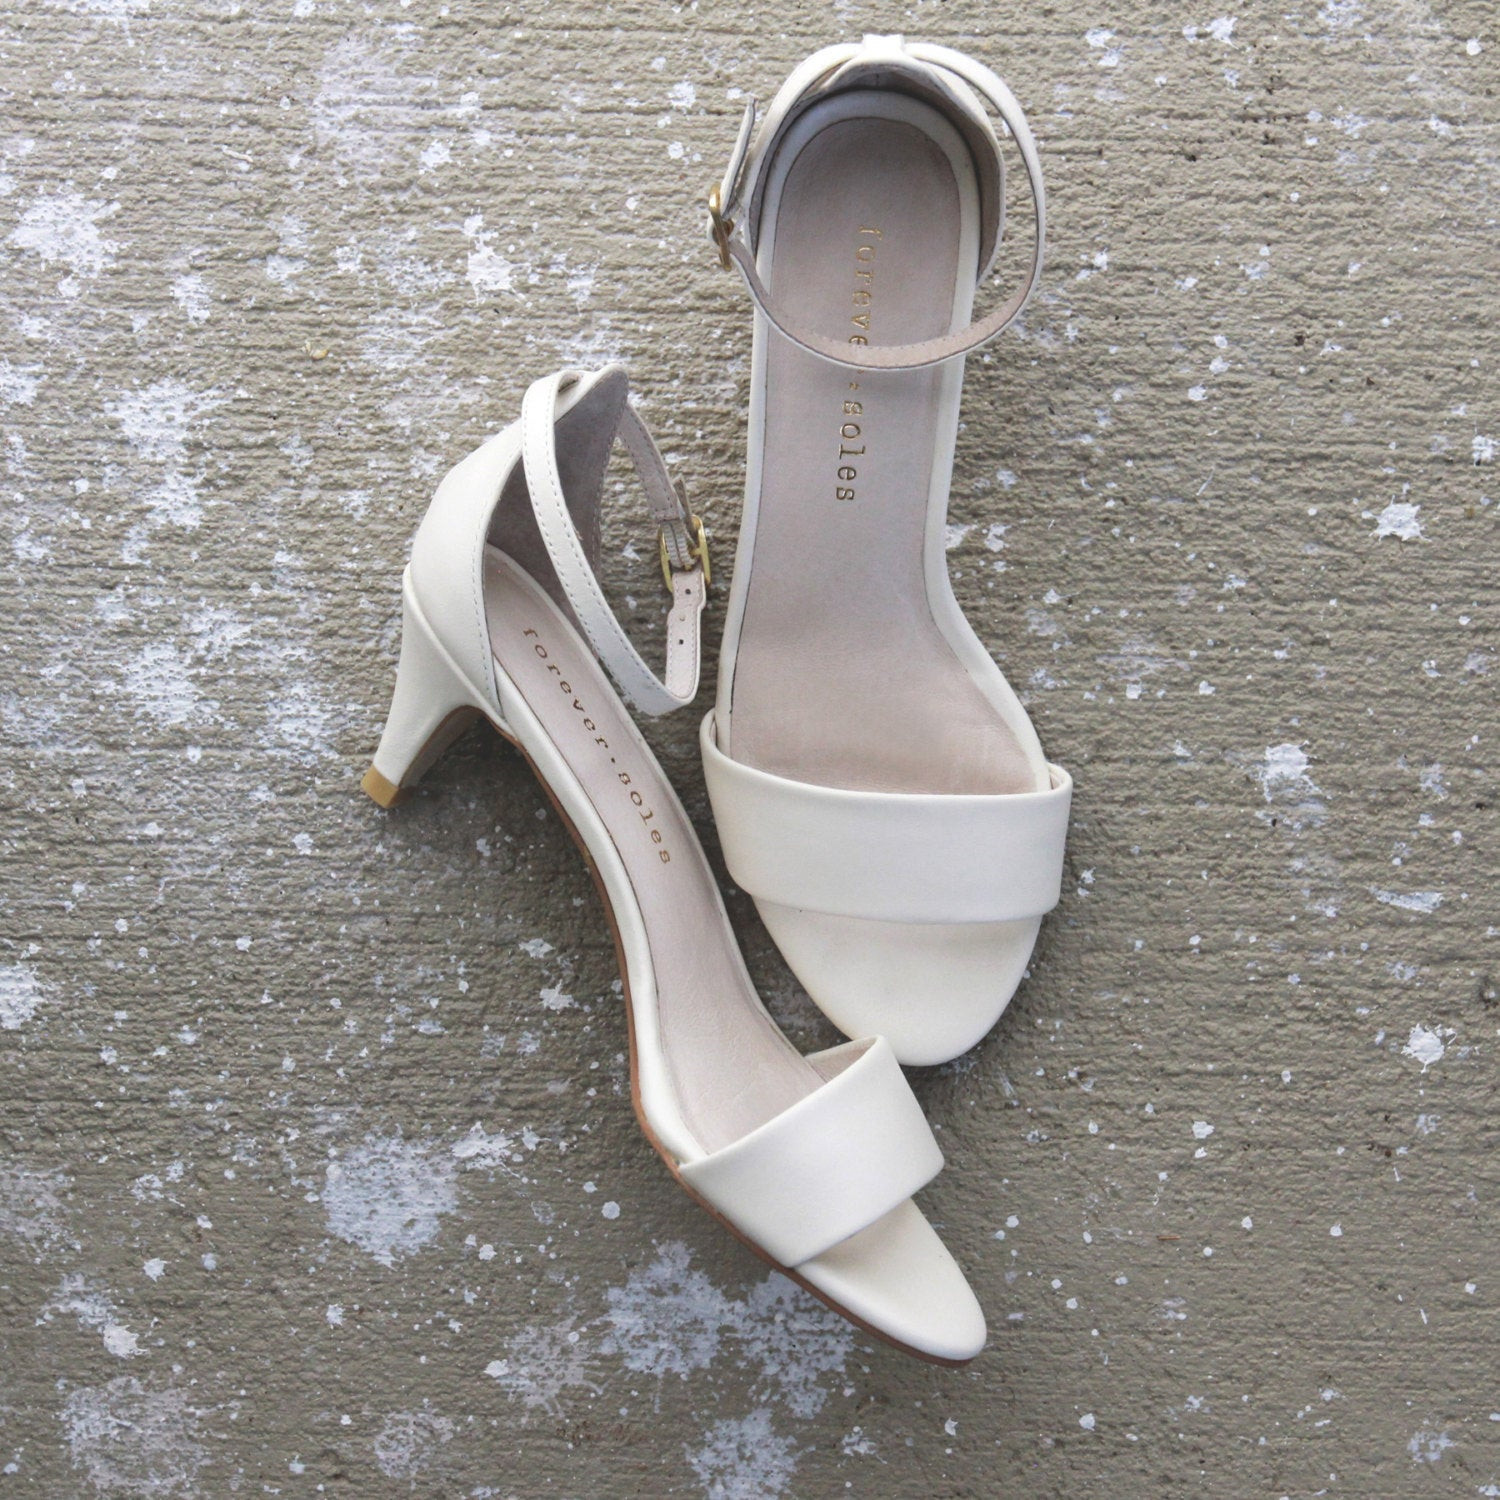 Low Wedding Shoes
 La s Ivory low heel wedding shoes Low heel by ForeverSoles